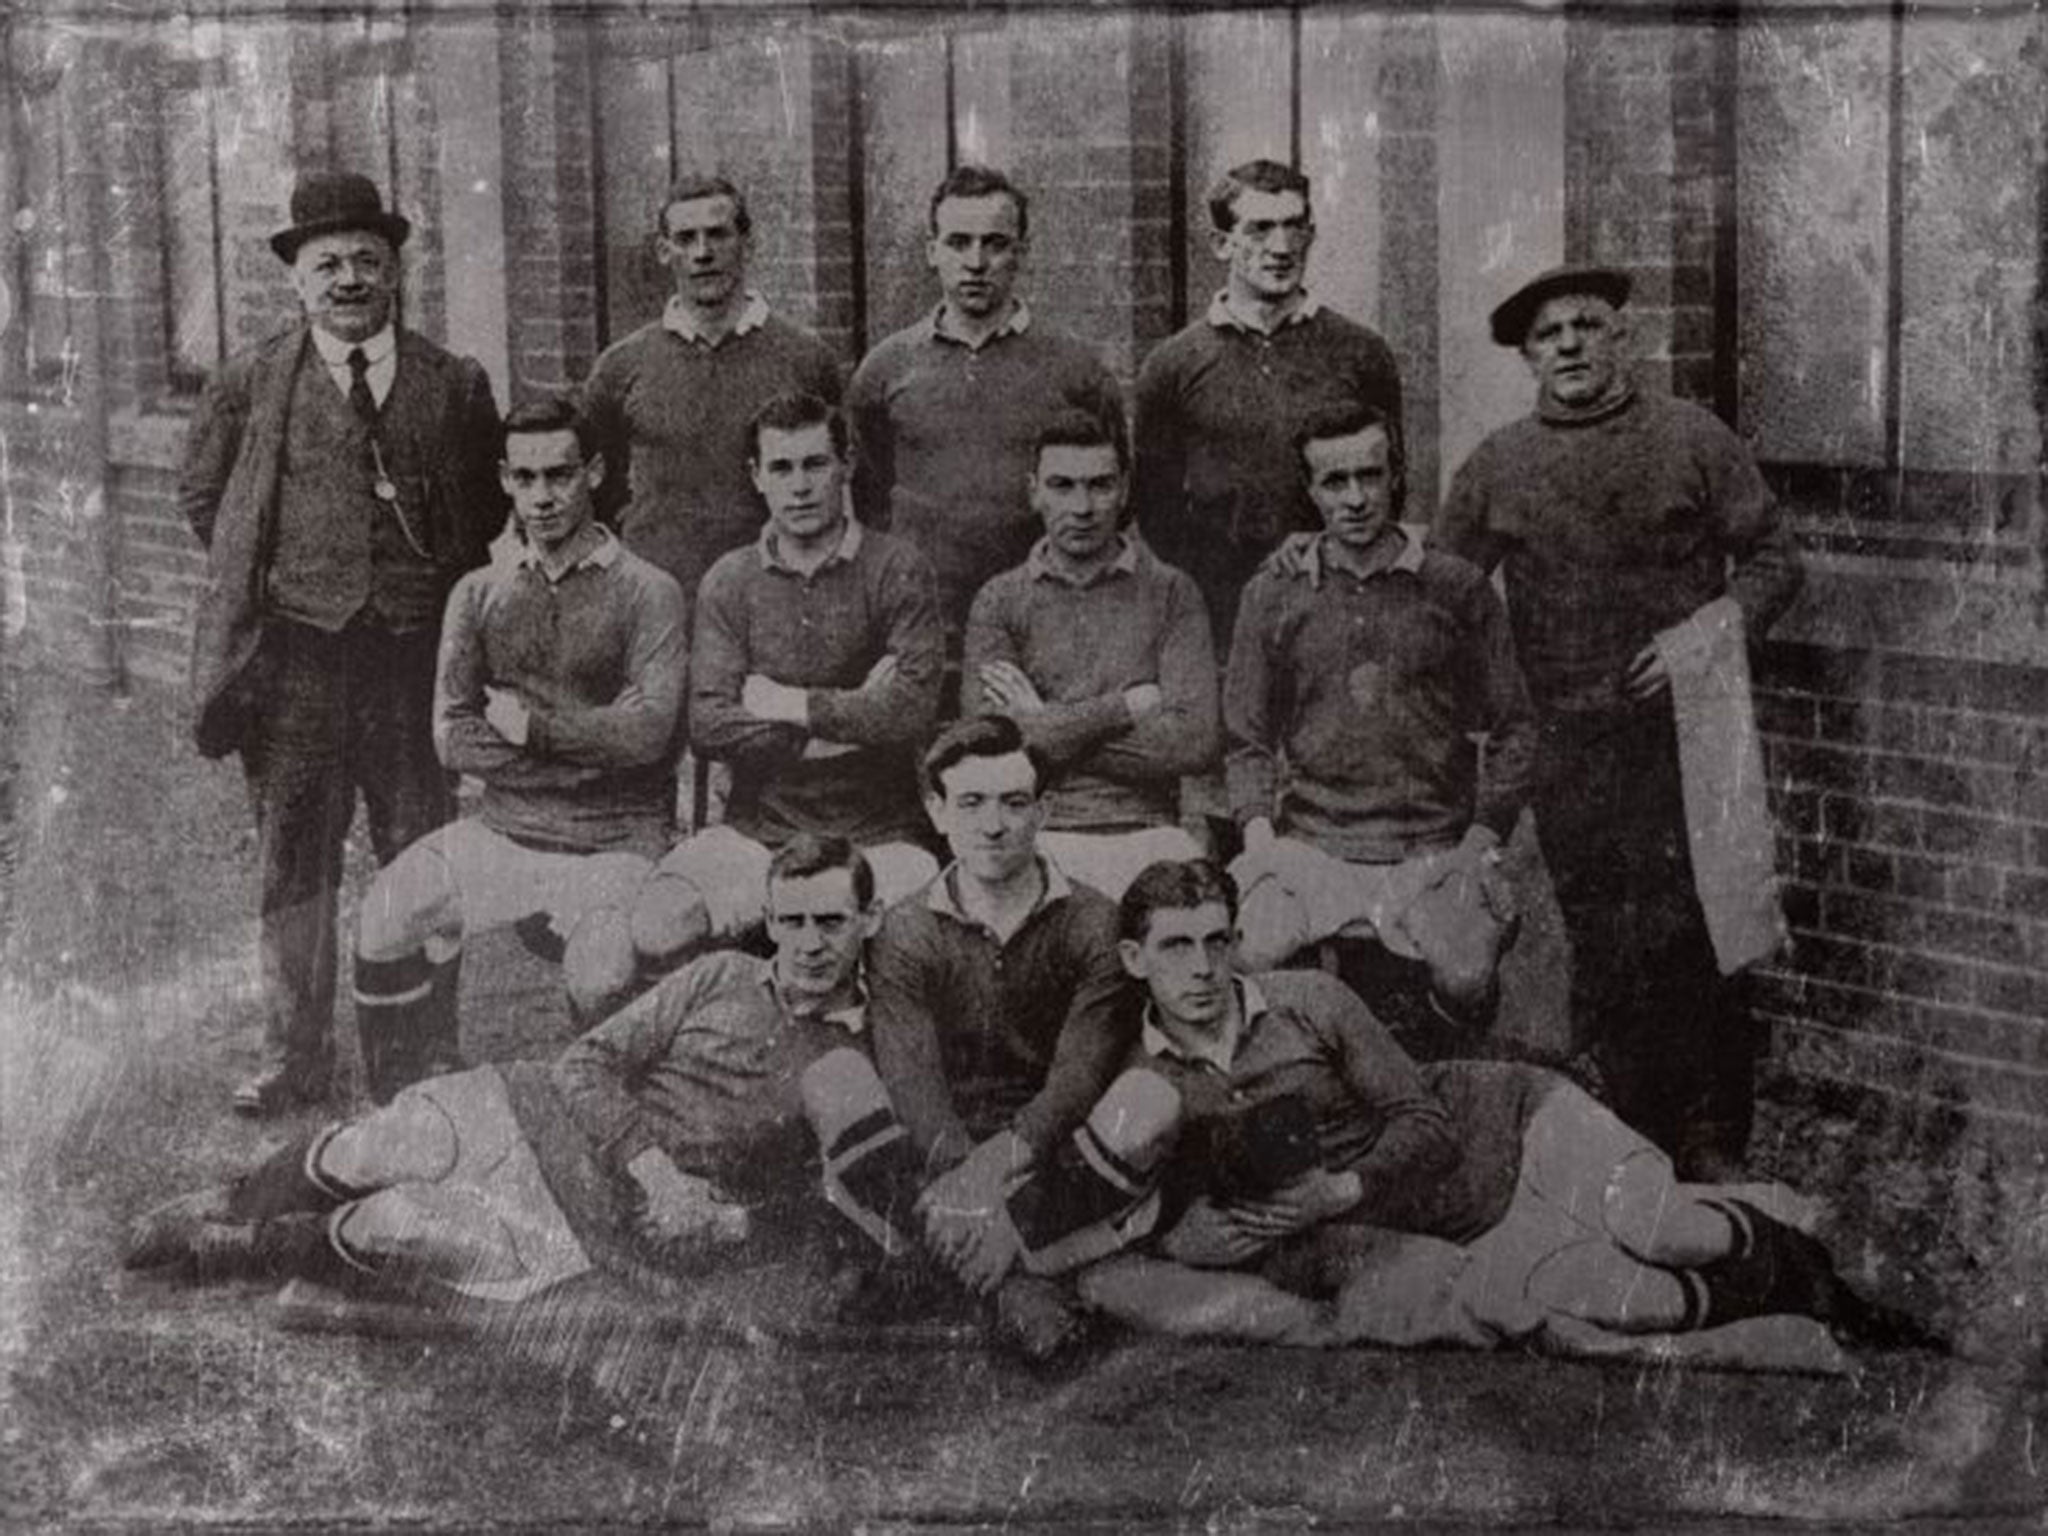 The players posing in their football kit the day they were enlisted